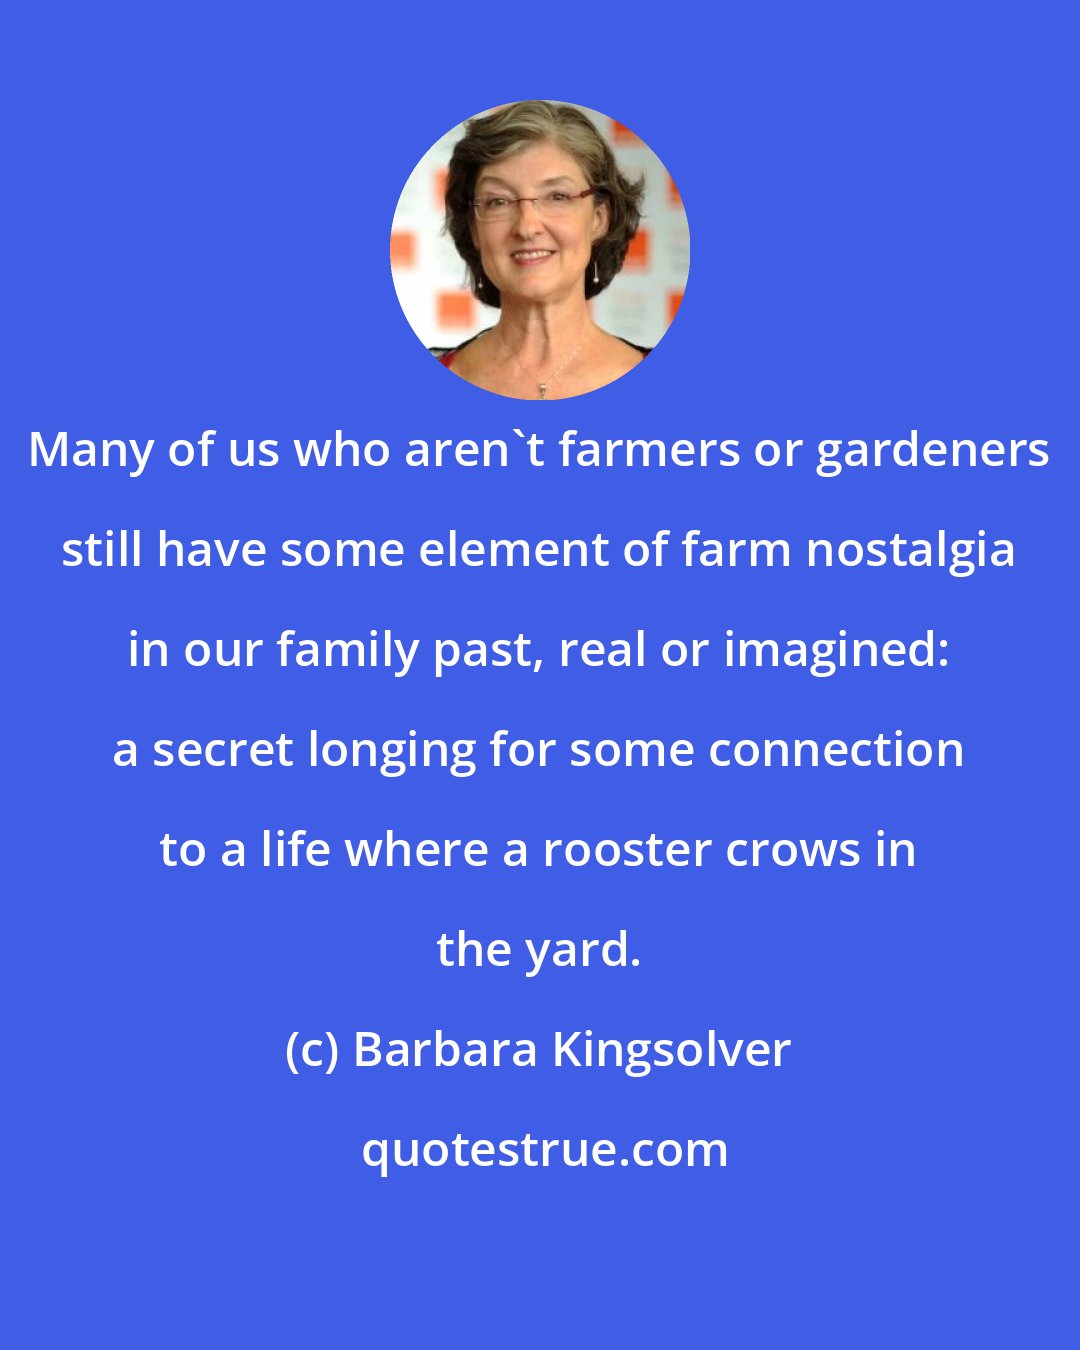 Barbara Kingsolver: Many of us who aren't farmers or gardeners still have some element of farm nostalgia in our family past, real or imagined: a secret longing for some connection to a life where a rooster crows in the yard.